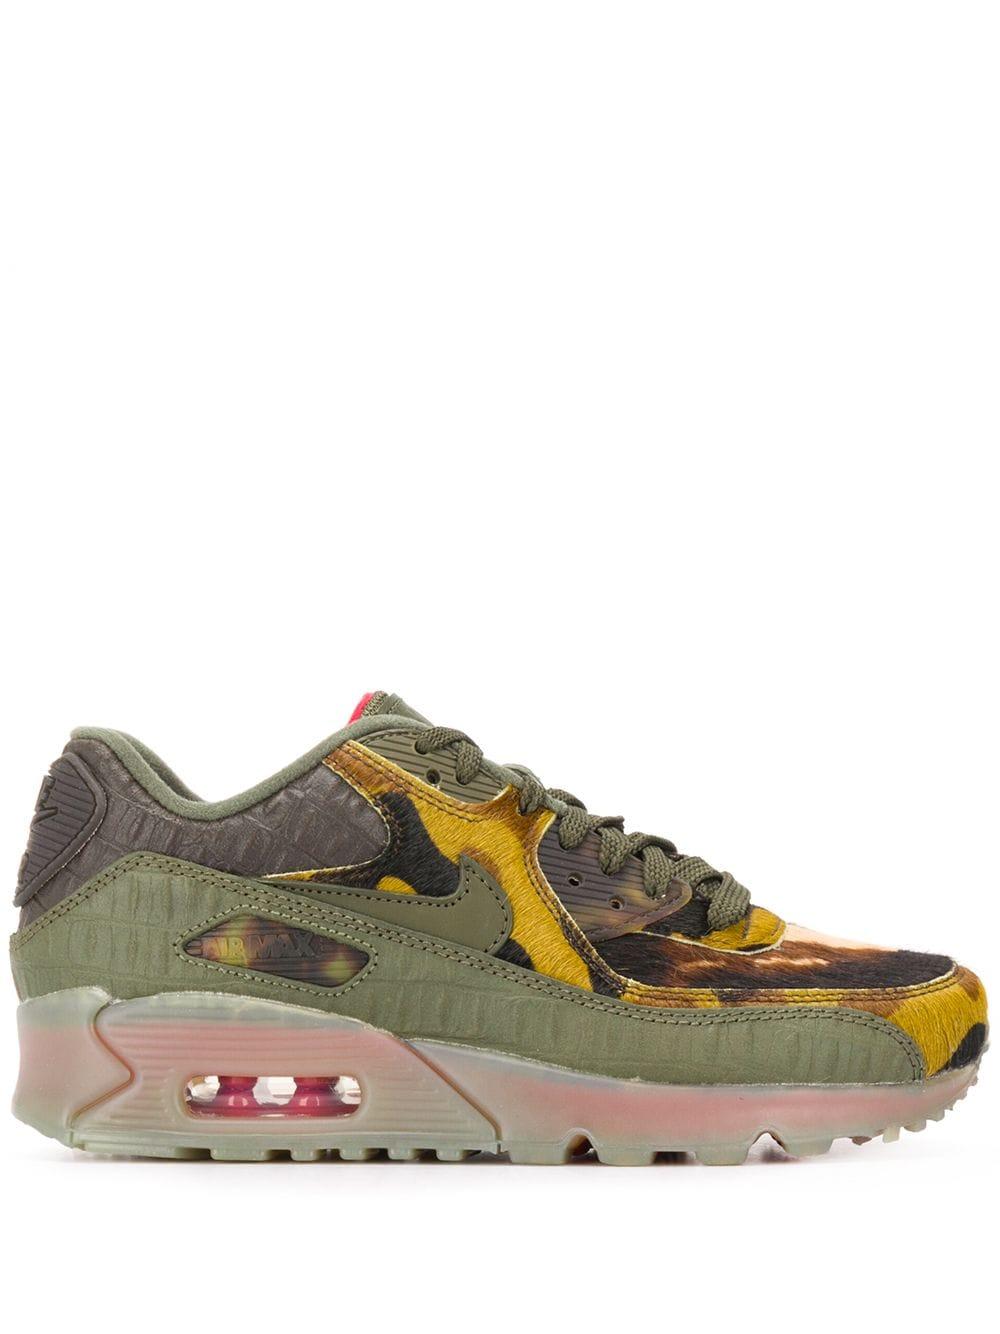 Nike Leather Air Max 90 Animal Print Sneakers in Green | Lyst اسي ميلان